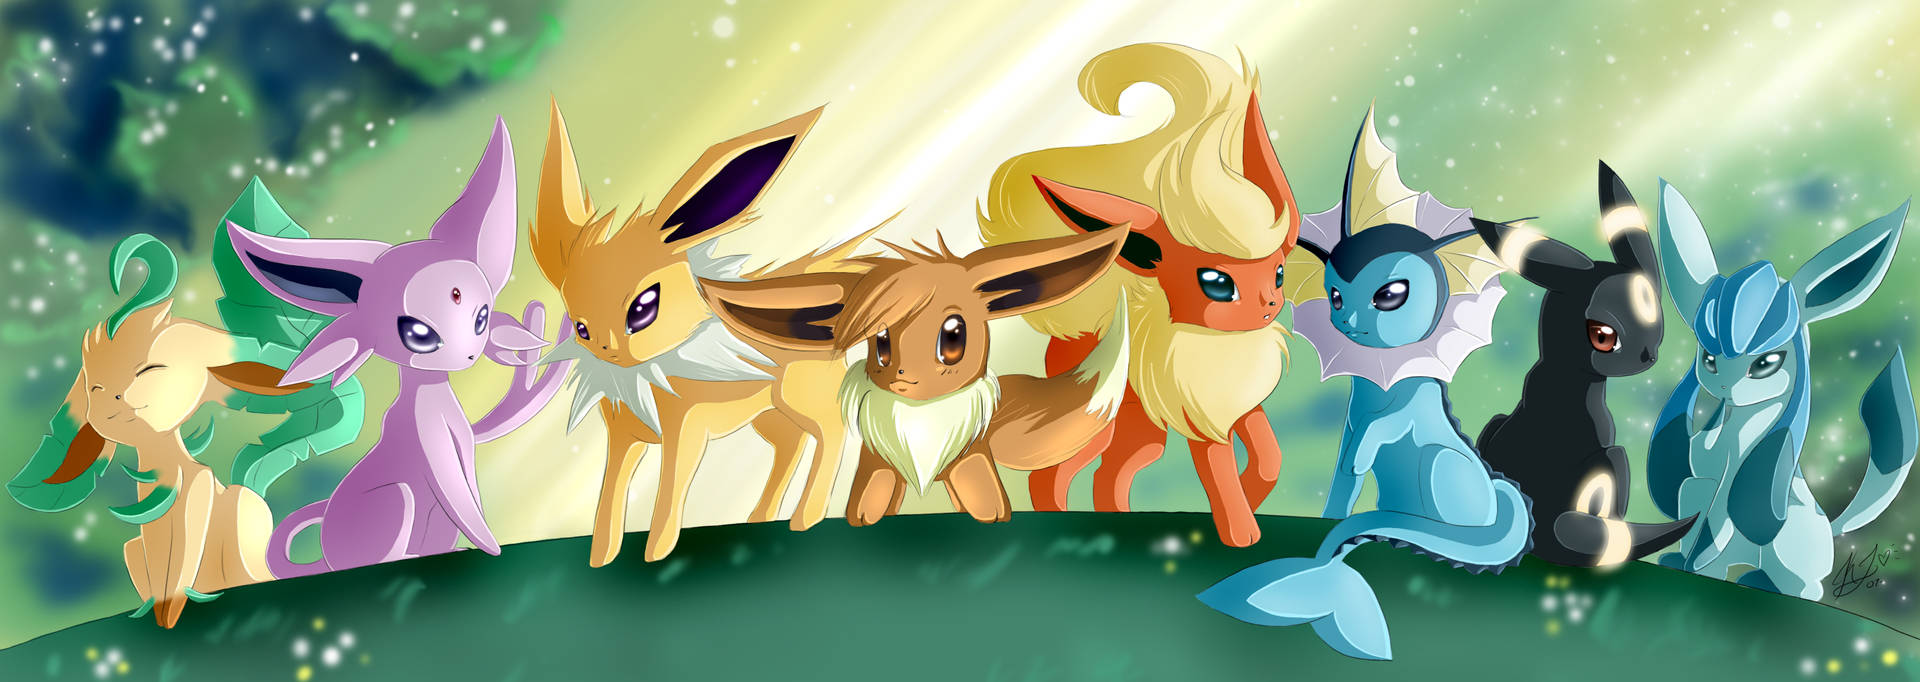 Cuteness Overload: Glaceon, Eevee And Their Pokémon Friends Background